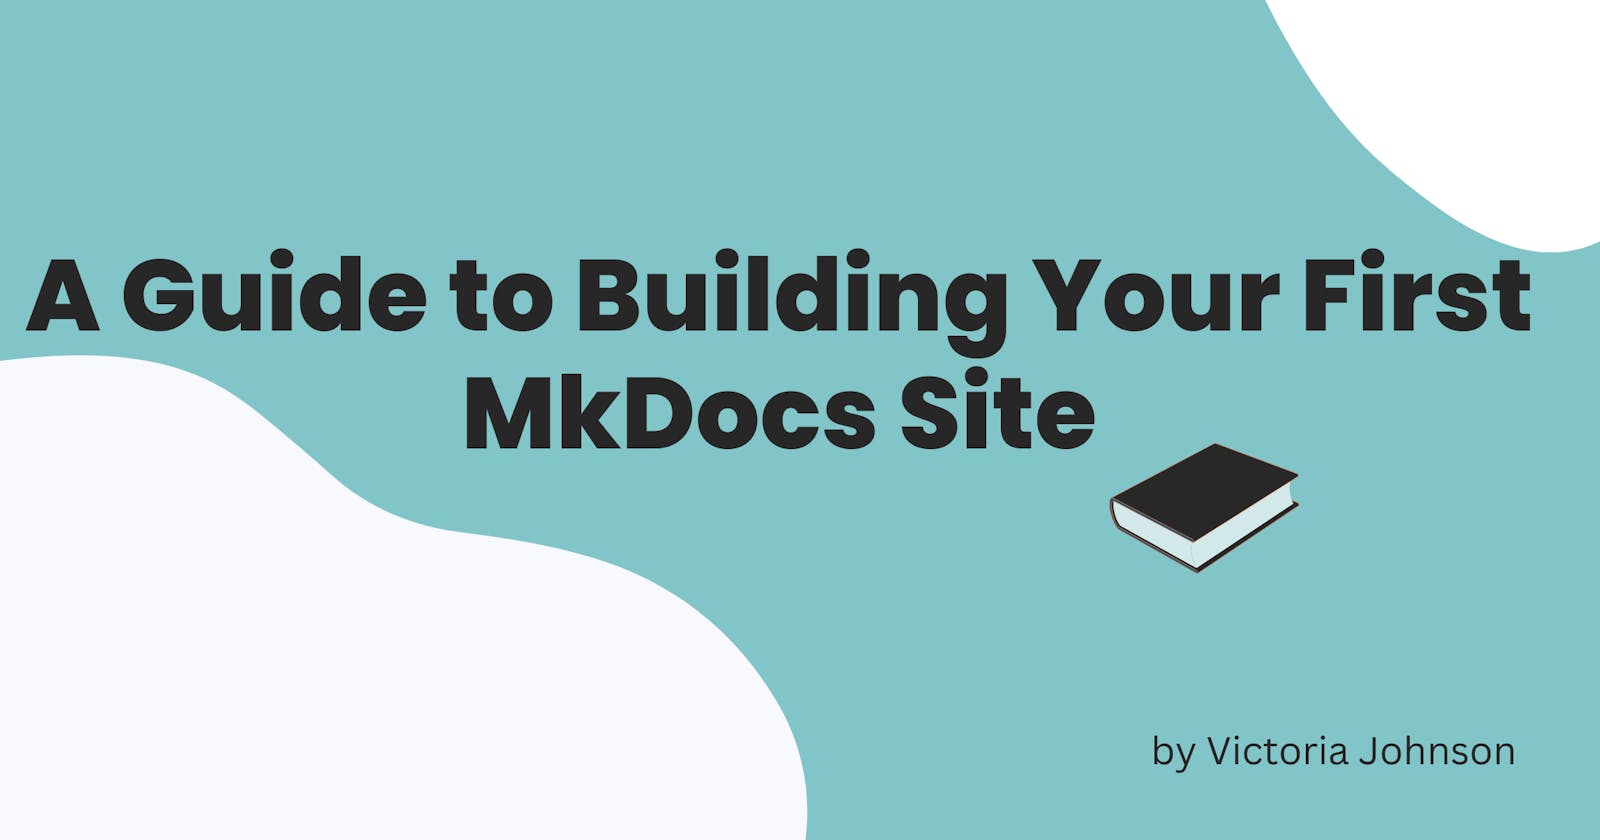 Getting Started with MkDocs: How to Build Your First Documentation Site